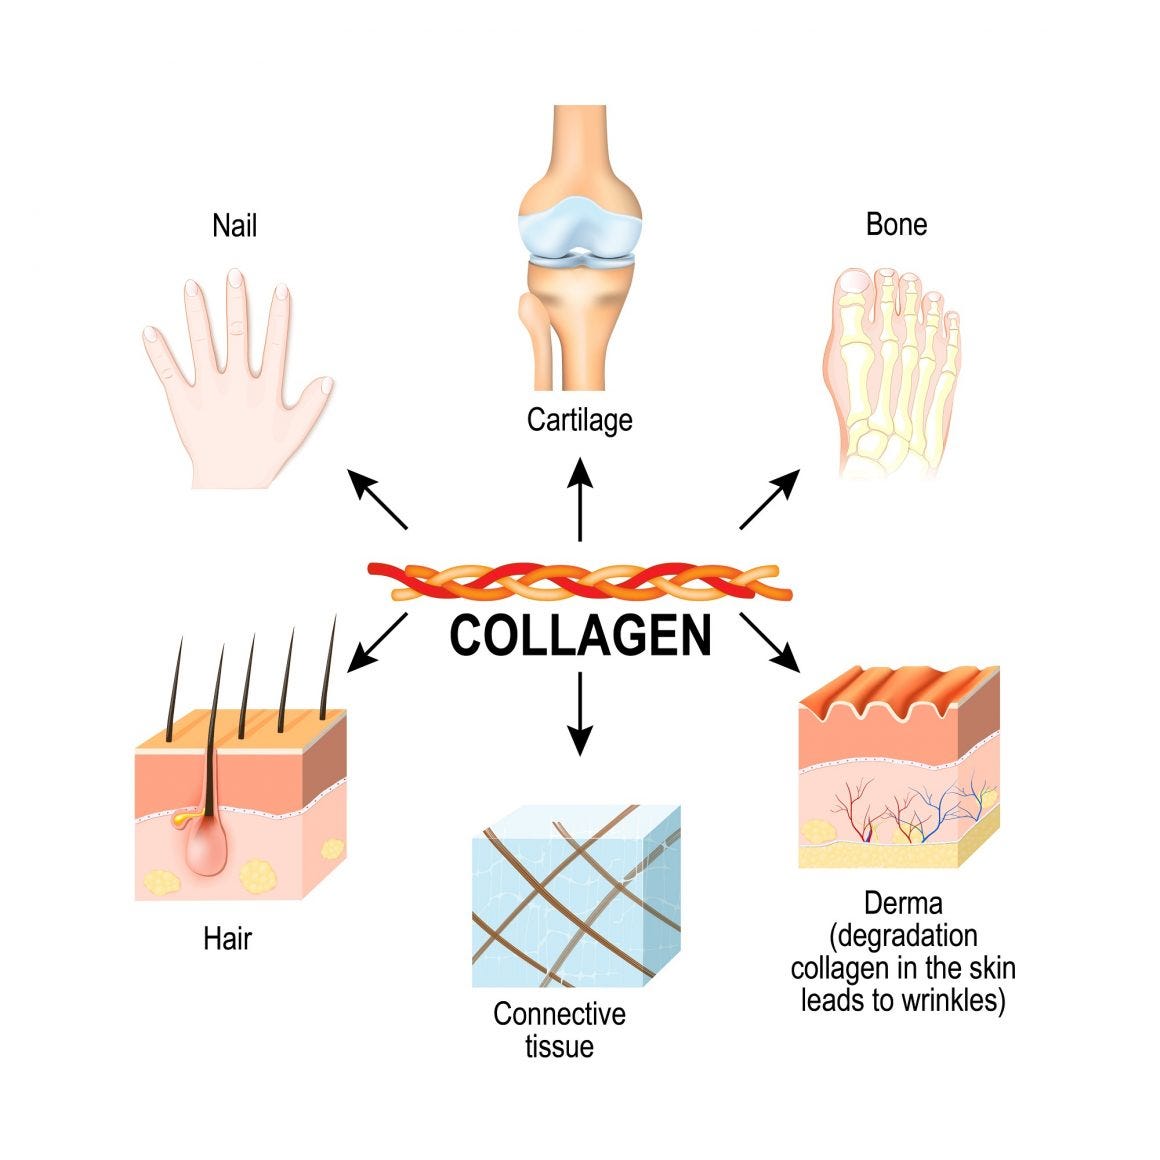 A Closer Look at Collagen and Antiaging